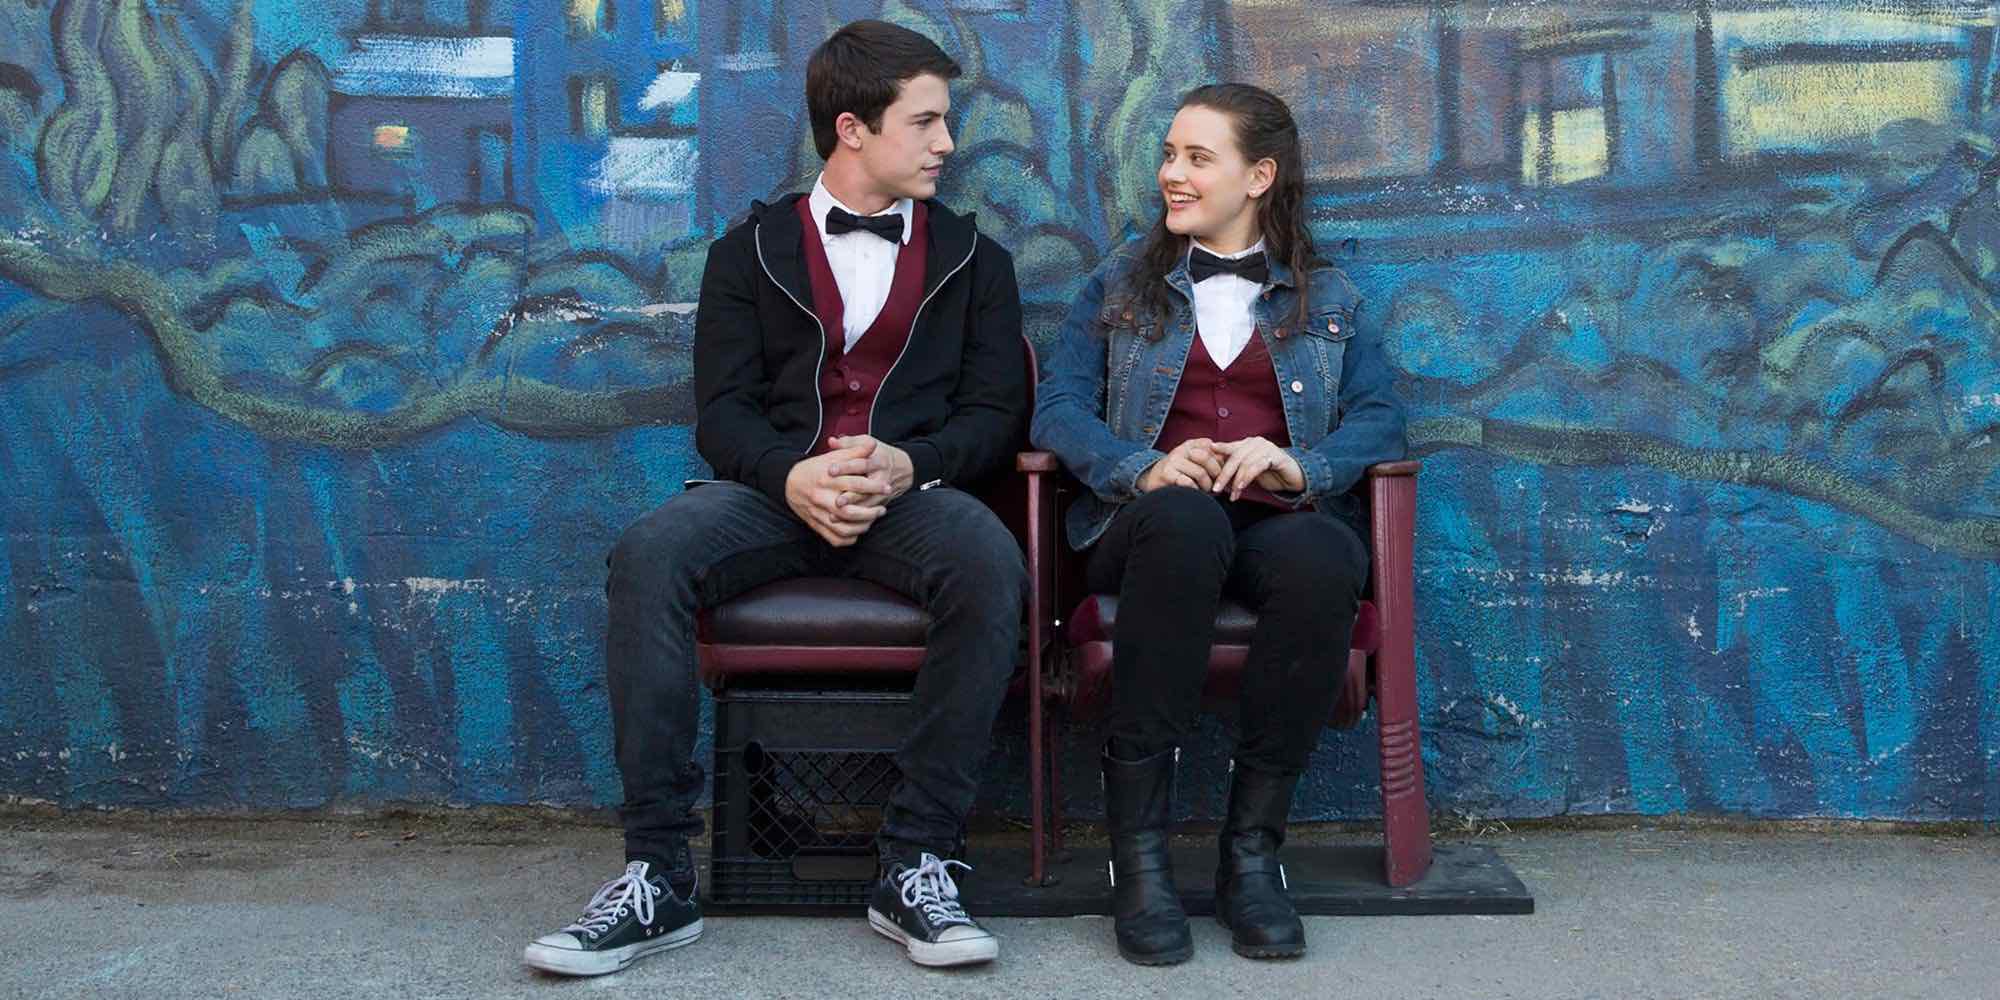 The Parents Television Council is urging for '13 Reasons Why' to be cancelled by Netflix. Here are 13 reasons why the show shouldn't be cancelled.